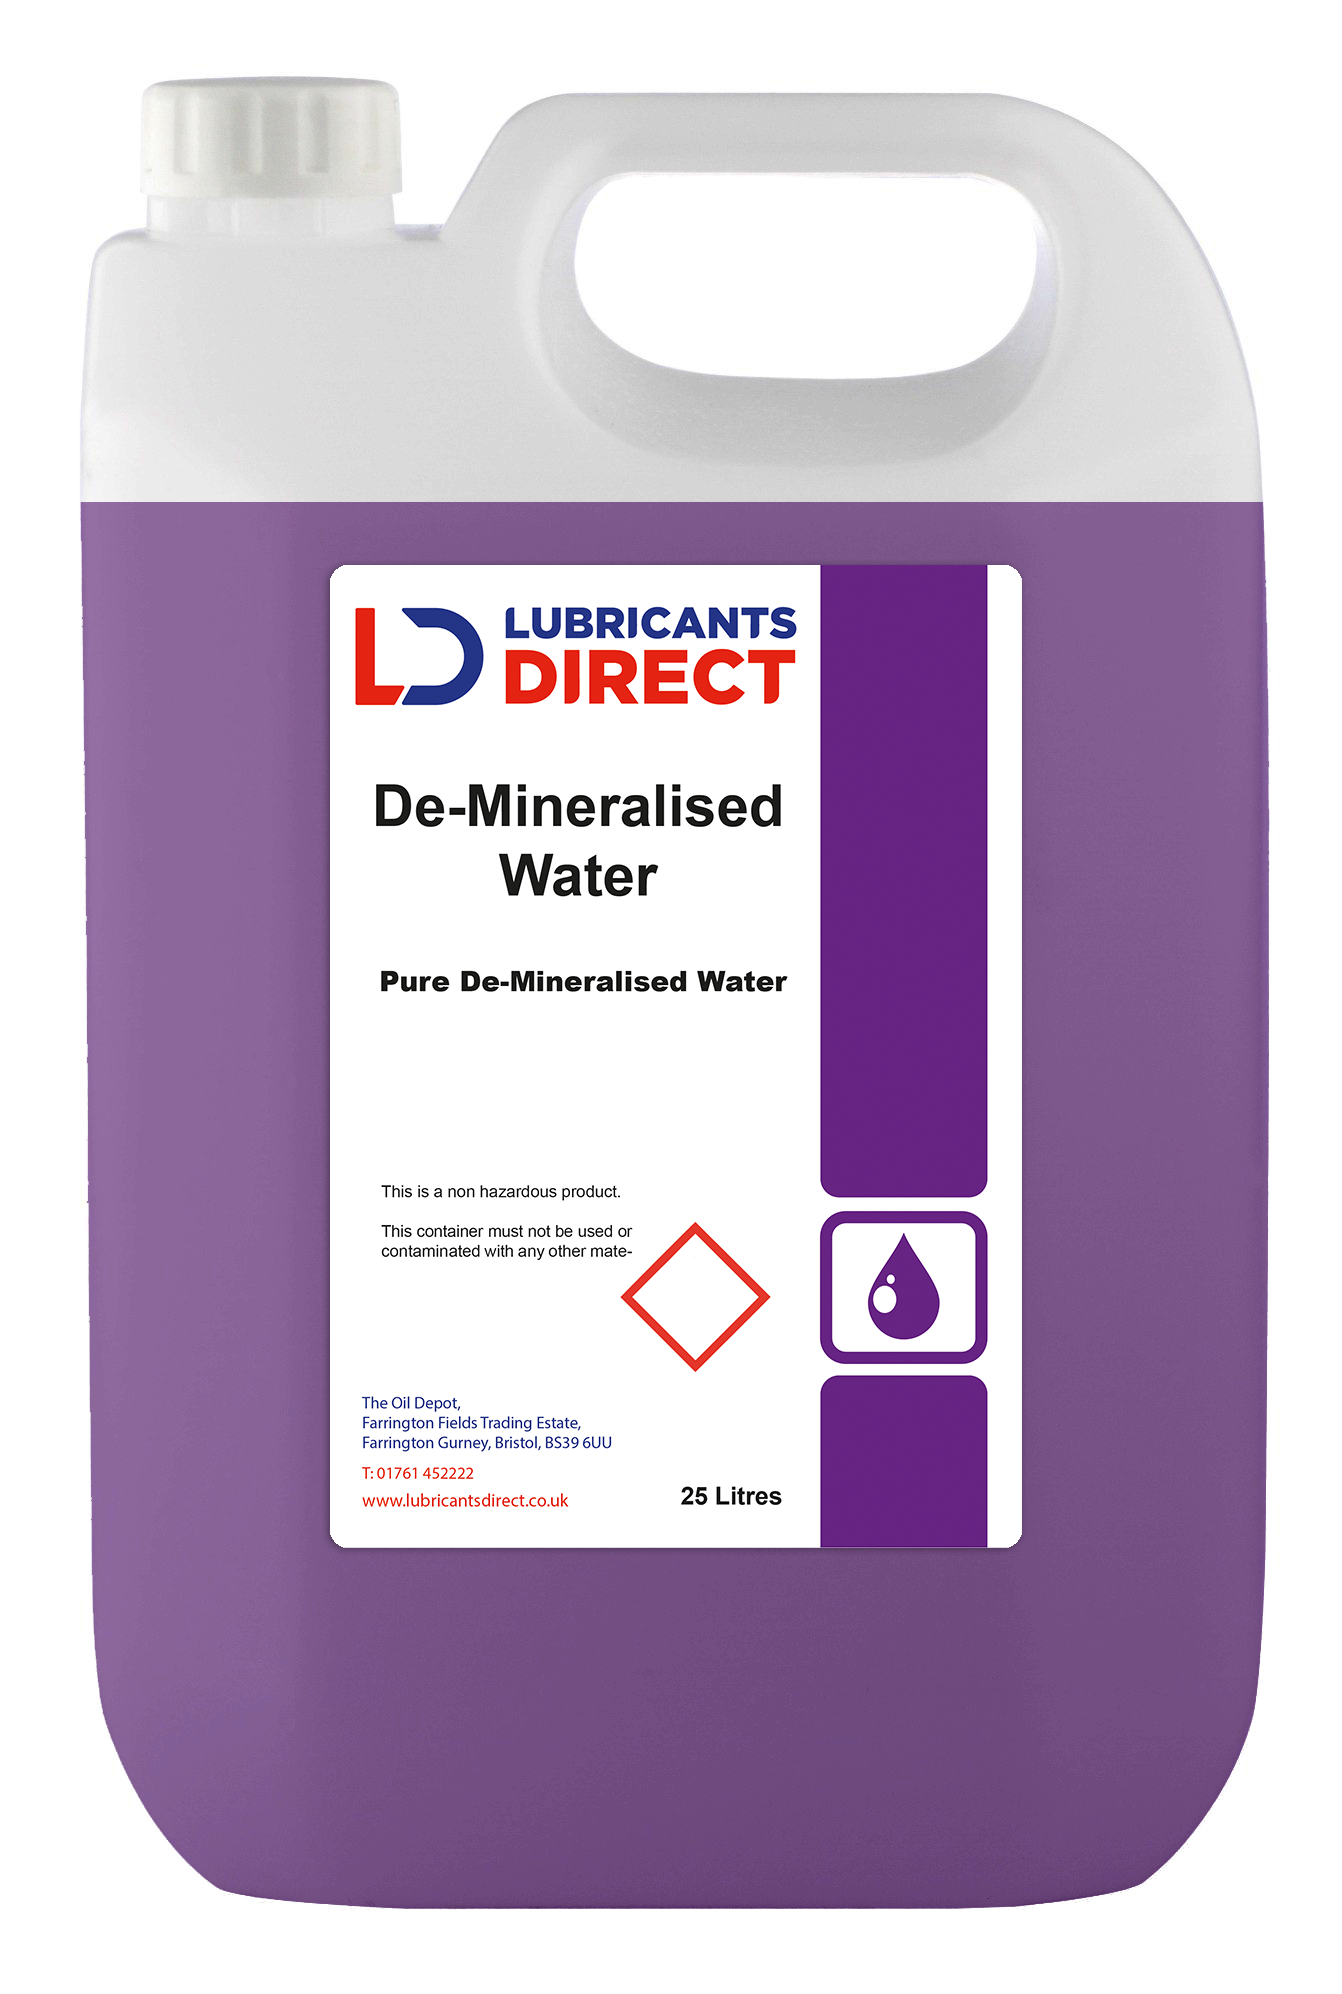 https://commercial.fordfuels.co.uk/wp-content/uploads/sites/10/LD-De-Mineralised-Water-1-303x450.png+https://commercial.fordfuels.co.uk/wp-content/uploads/sites/10/LD-De-Mineralised-Water-1-606x900.png